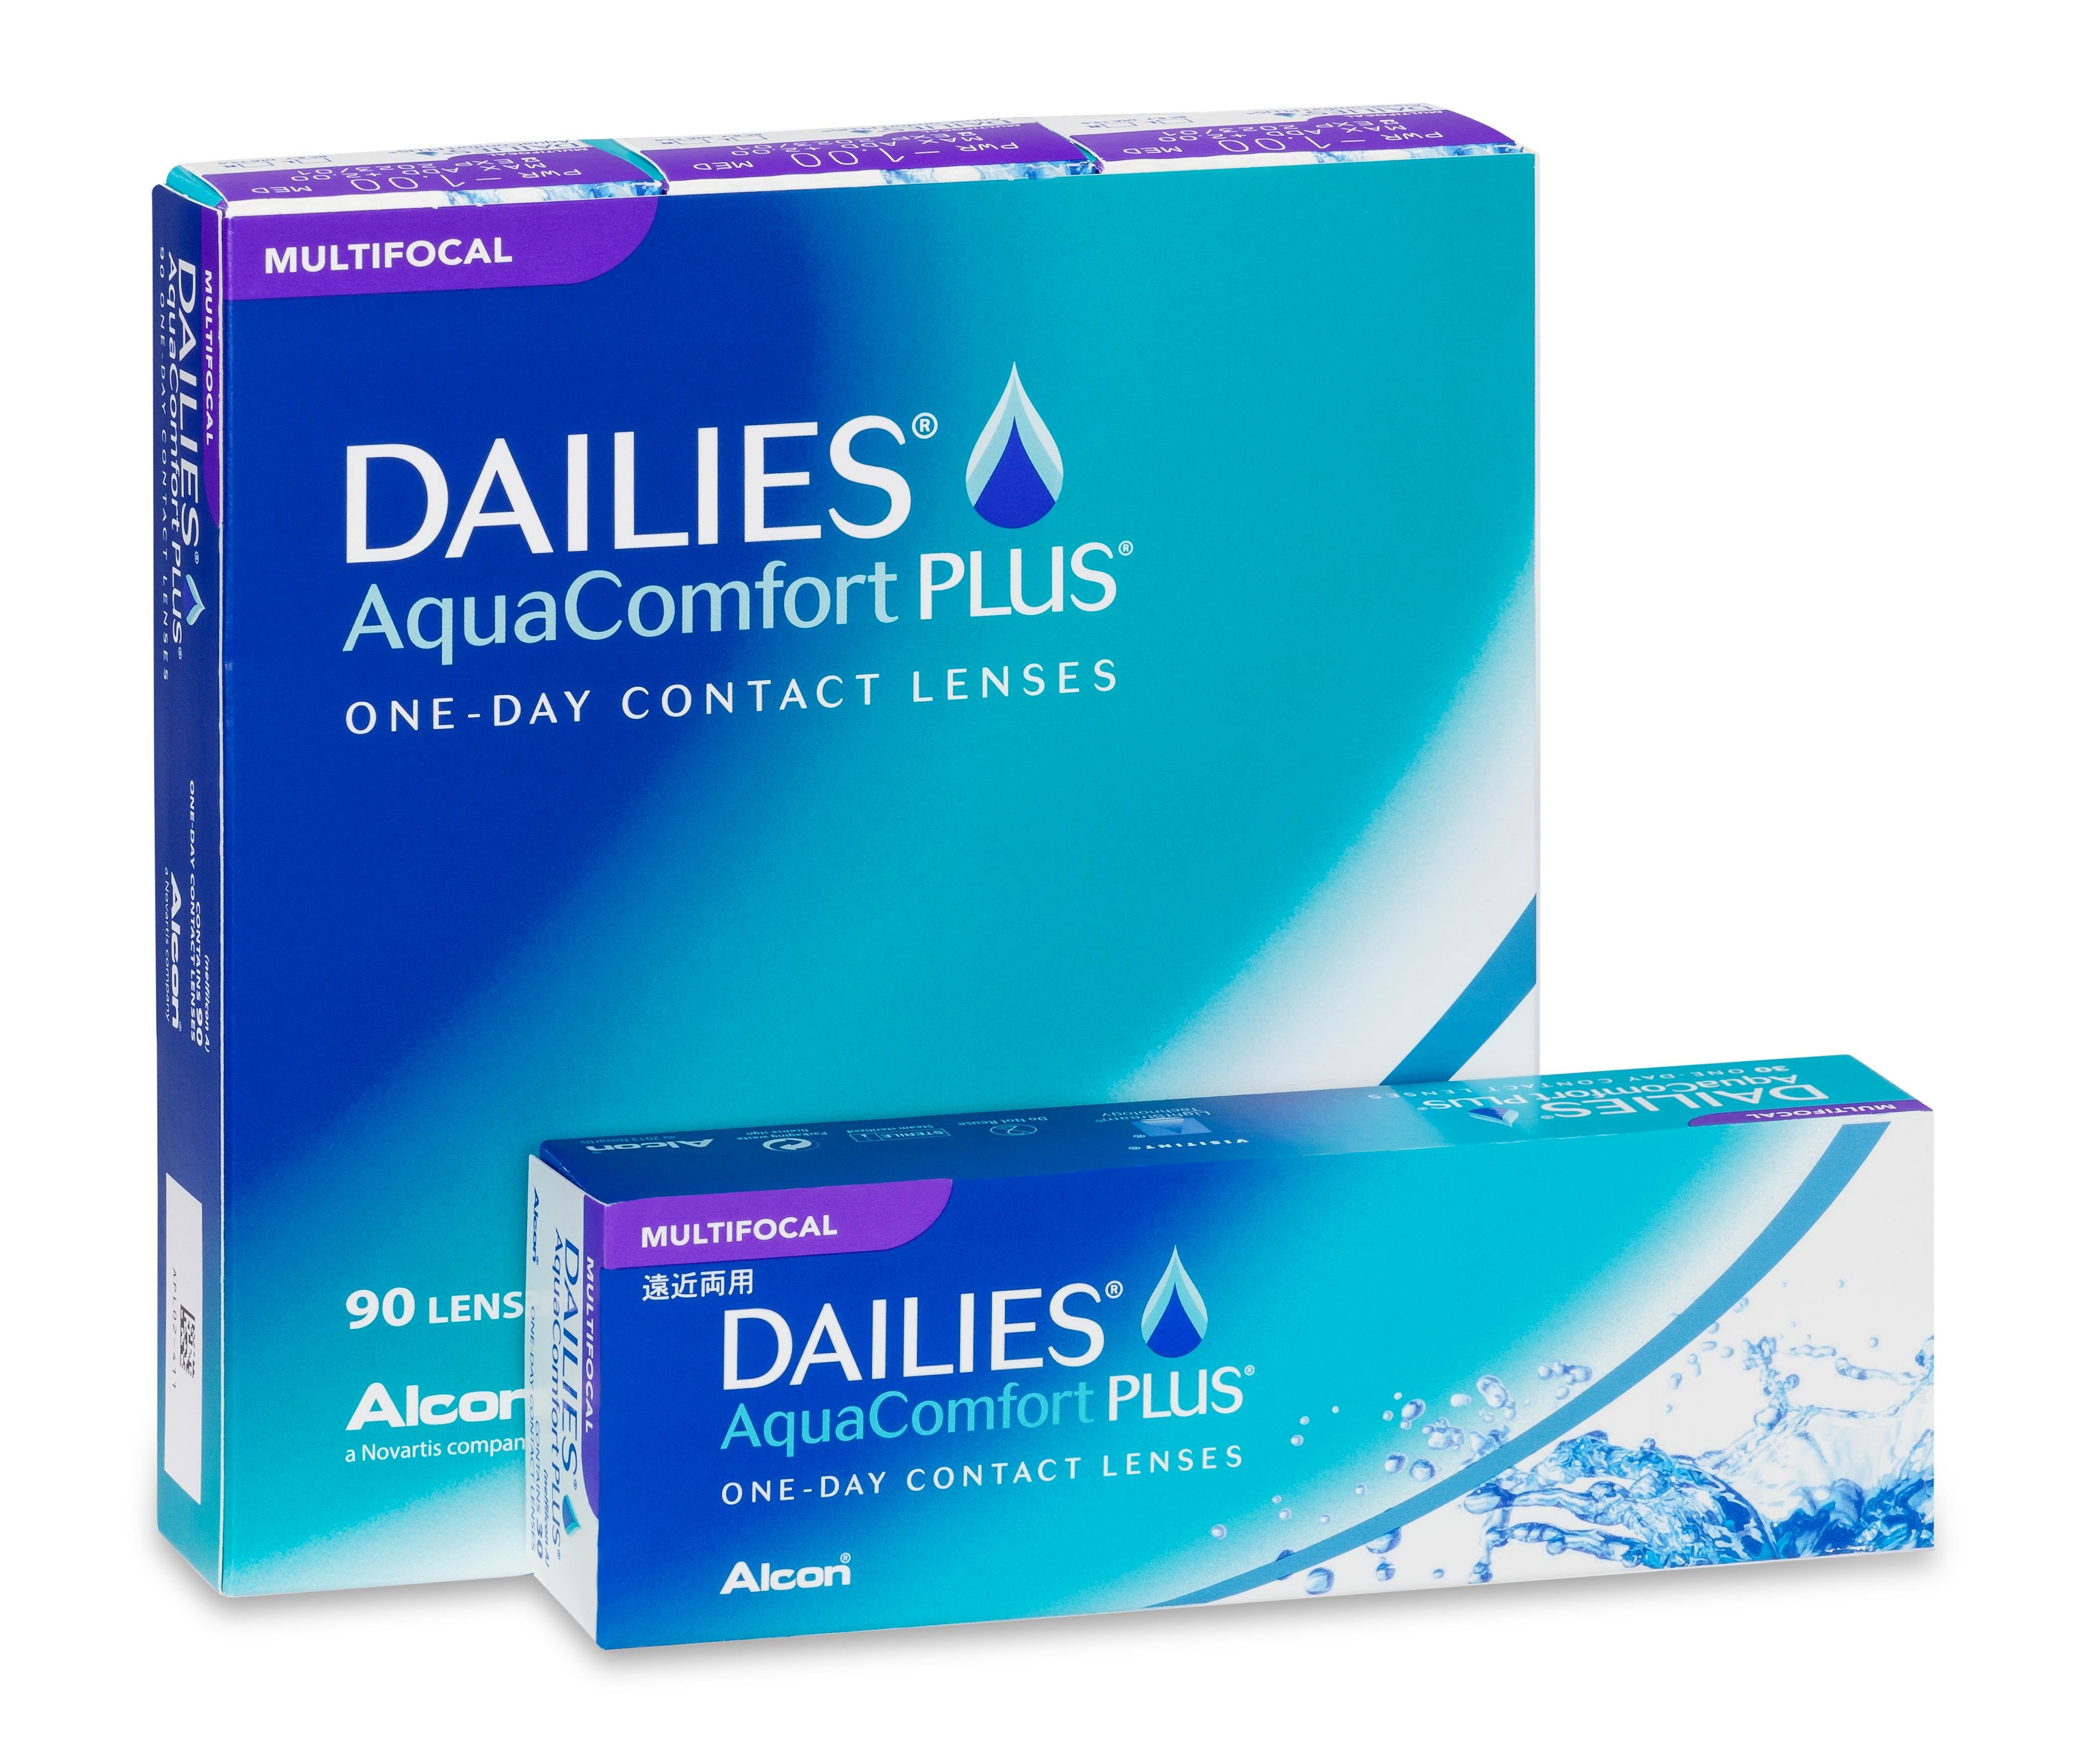 dailies-aquacomfort-plus-toric-30-pack-cheap-contacts-online-at-my